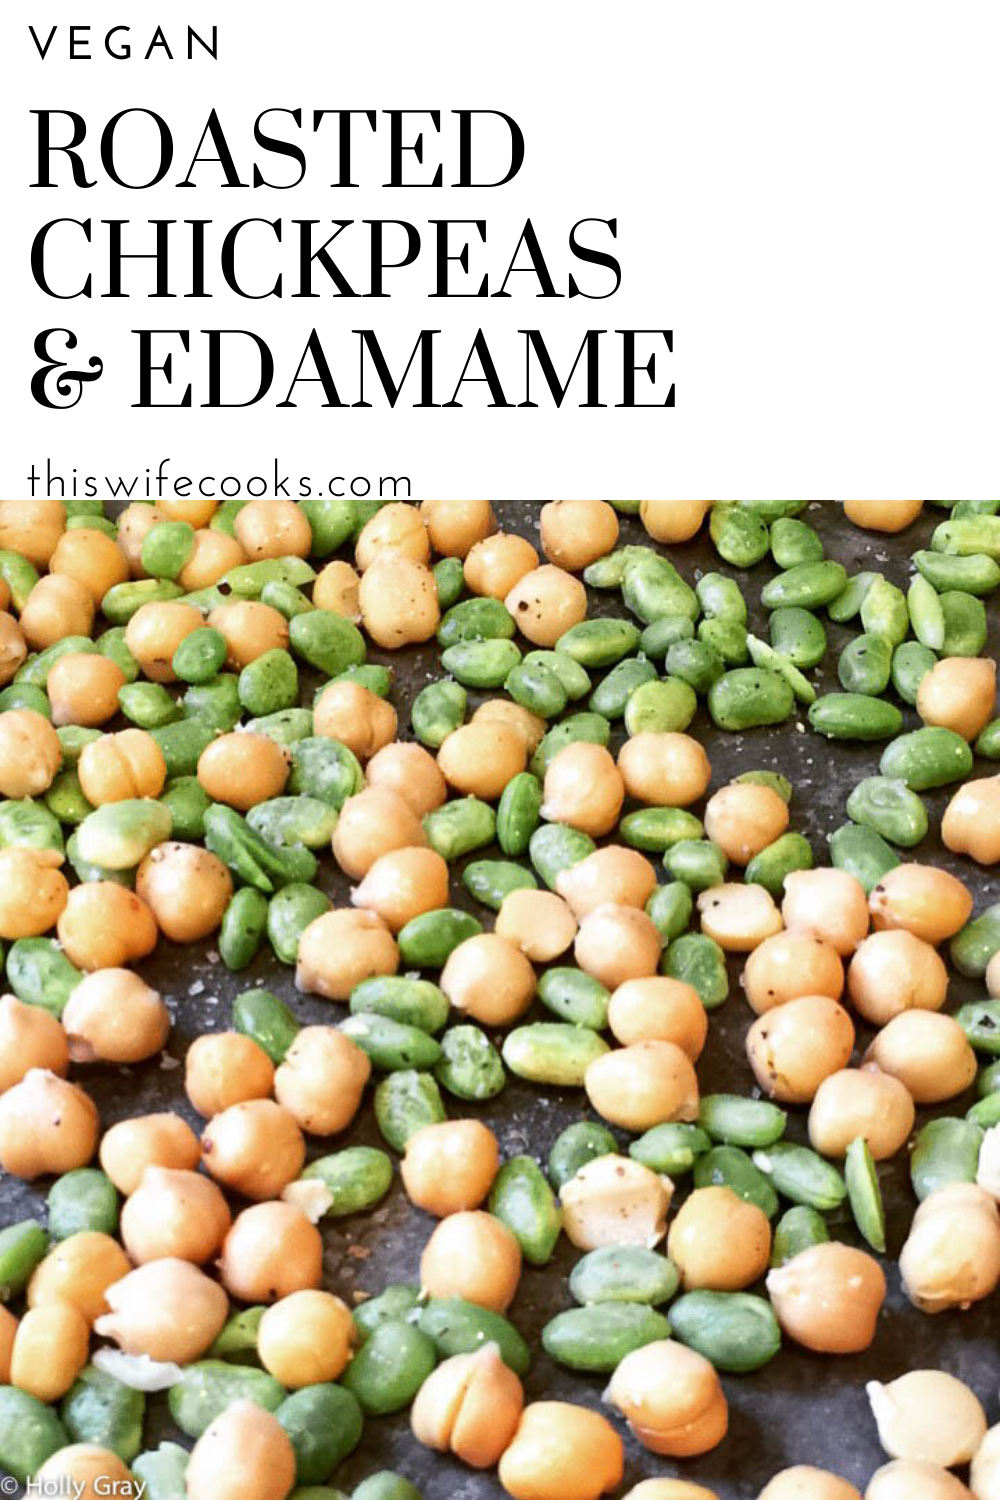 Roasted Chickpeas and Edamame ~ Loaded with plant-based protein and super simple to make! via @thiswifecooks